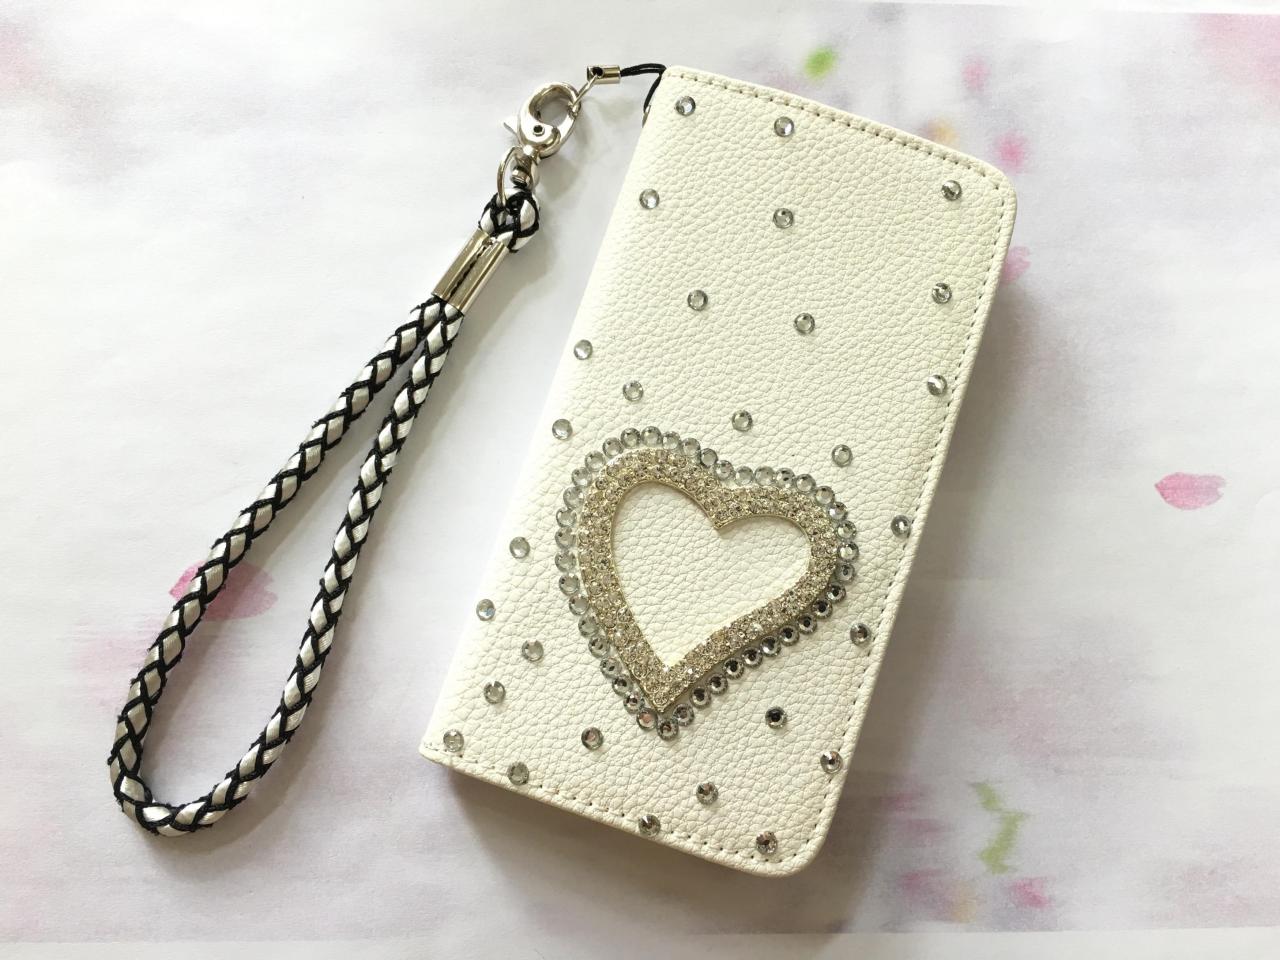 Heart Bling Iphone 6 6s 4.7 Leather Wallet Case, Crystal Iphone 6 6s Plus Leather Wallet Case, Iphone Se, 5c, 5, 5s Bling Leather Wallet Case,